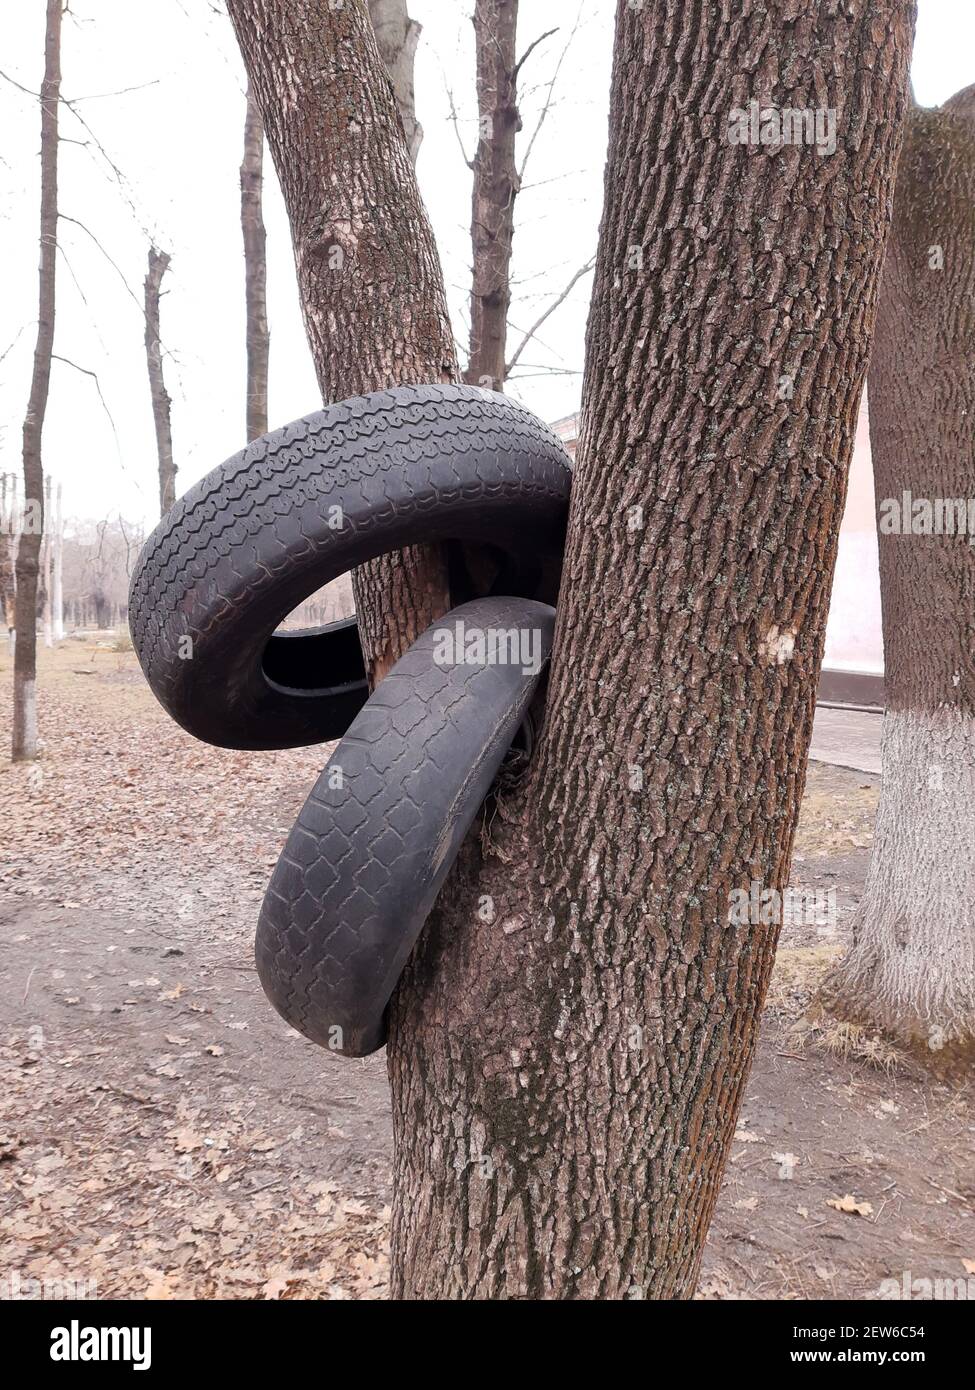 Two used car tires are dressed on a tree trunk in a city park. Stock Photo